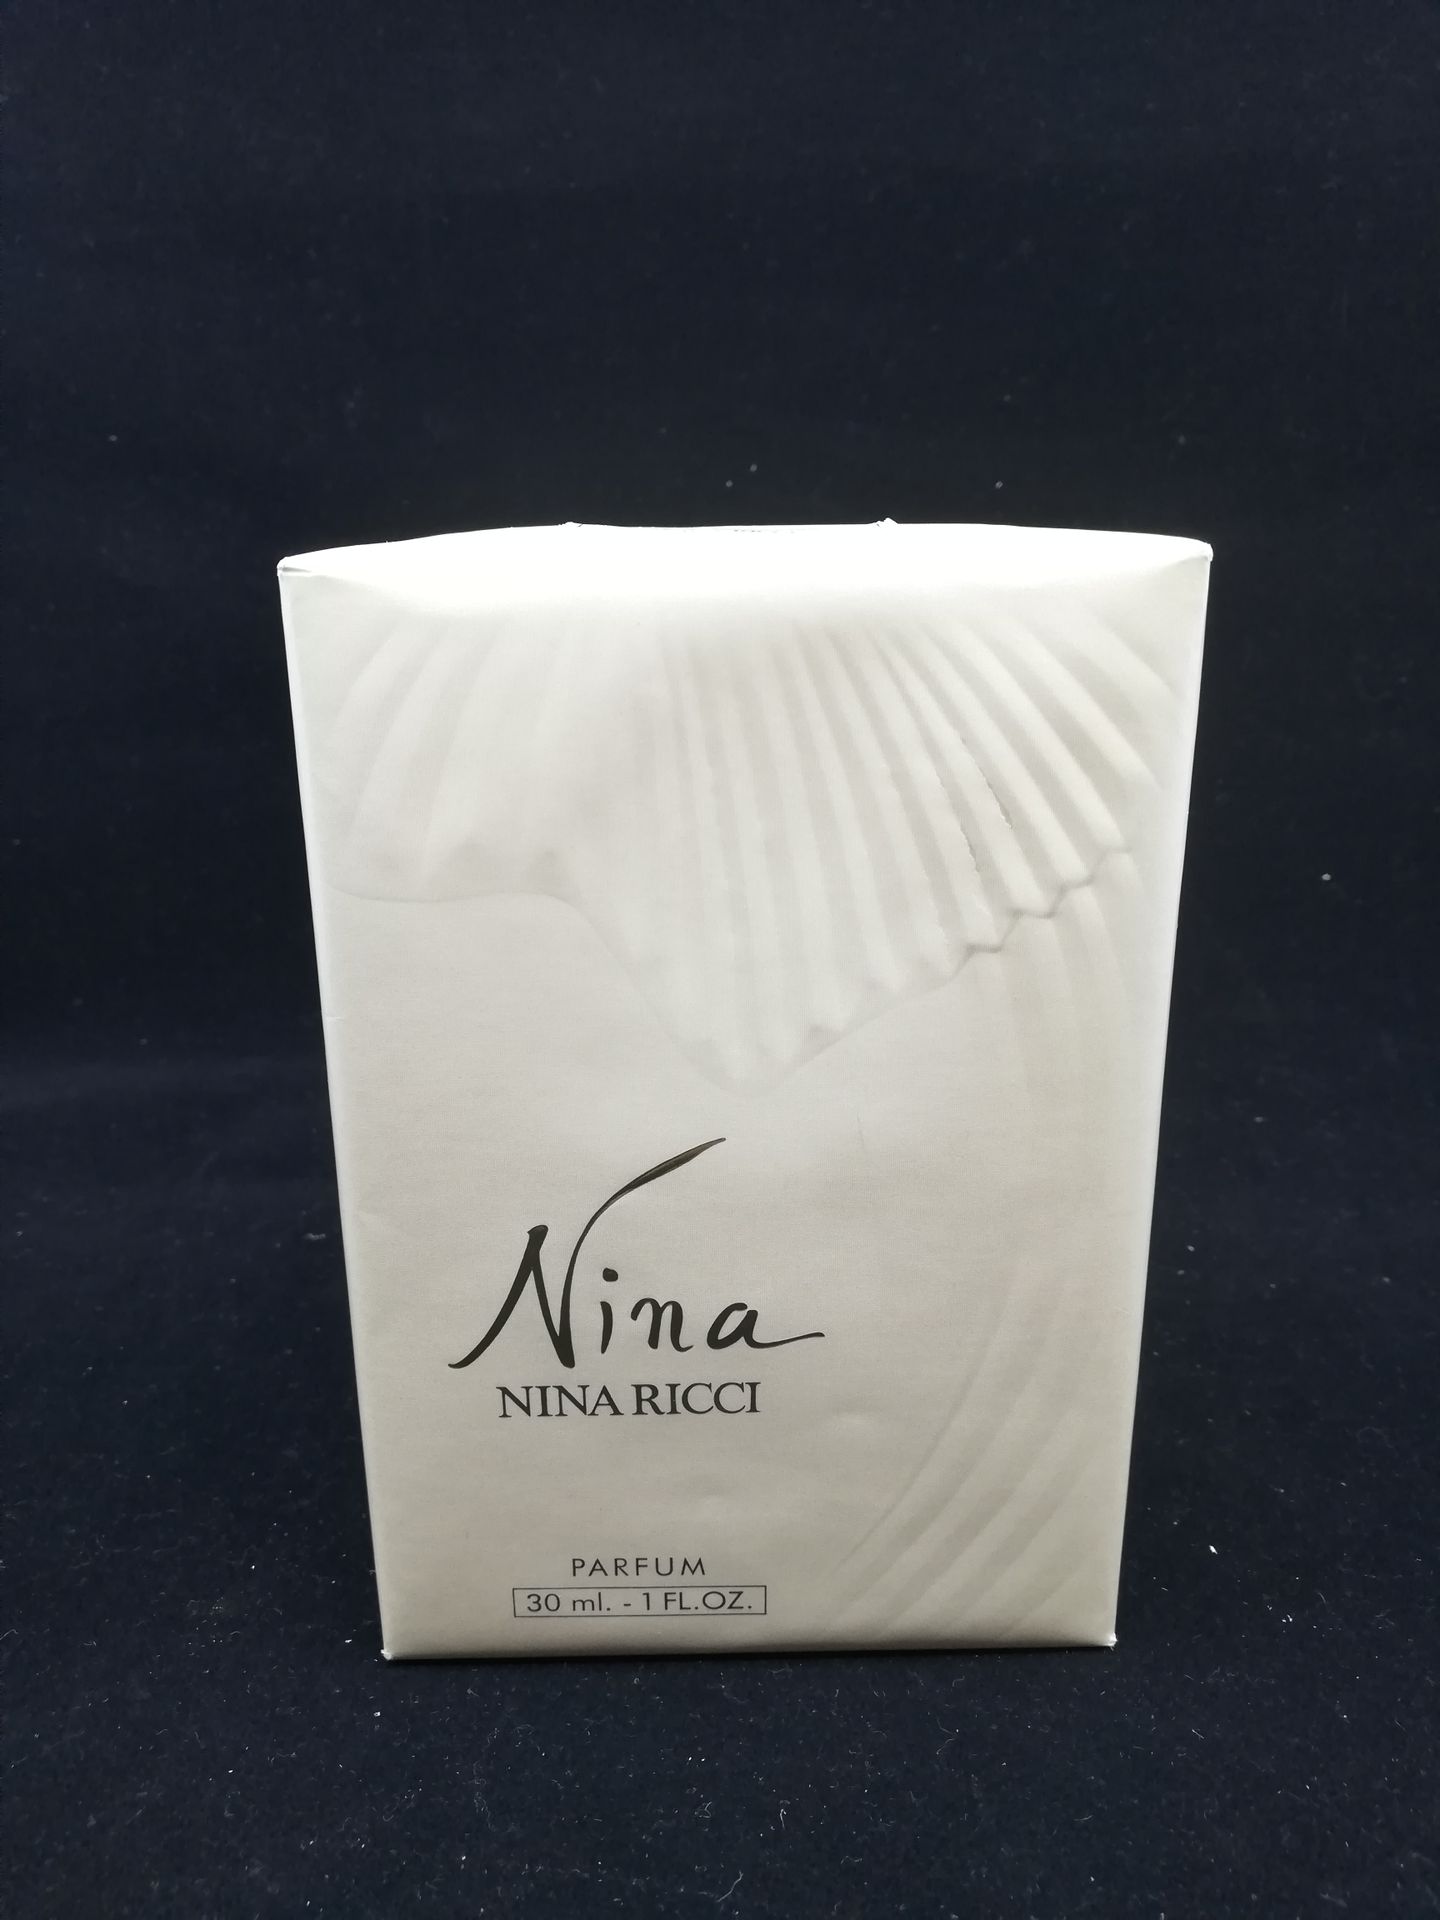 Null Nina Ricci - "Nina" - (1990s)

Presented in its titled box wrapped with emb&hellip;